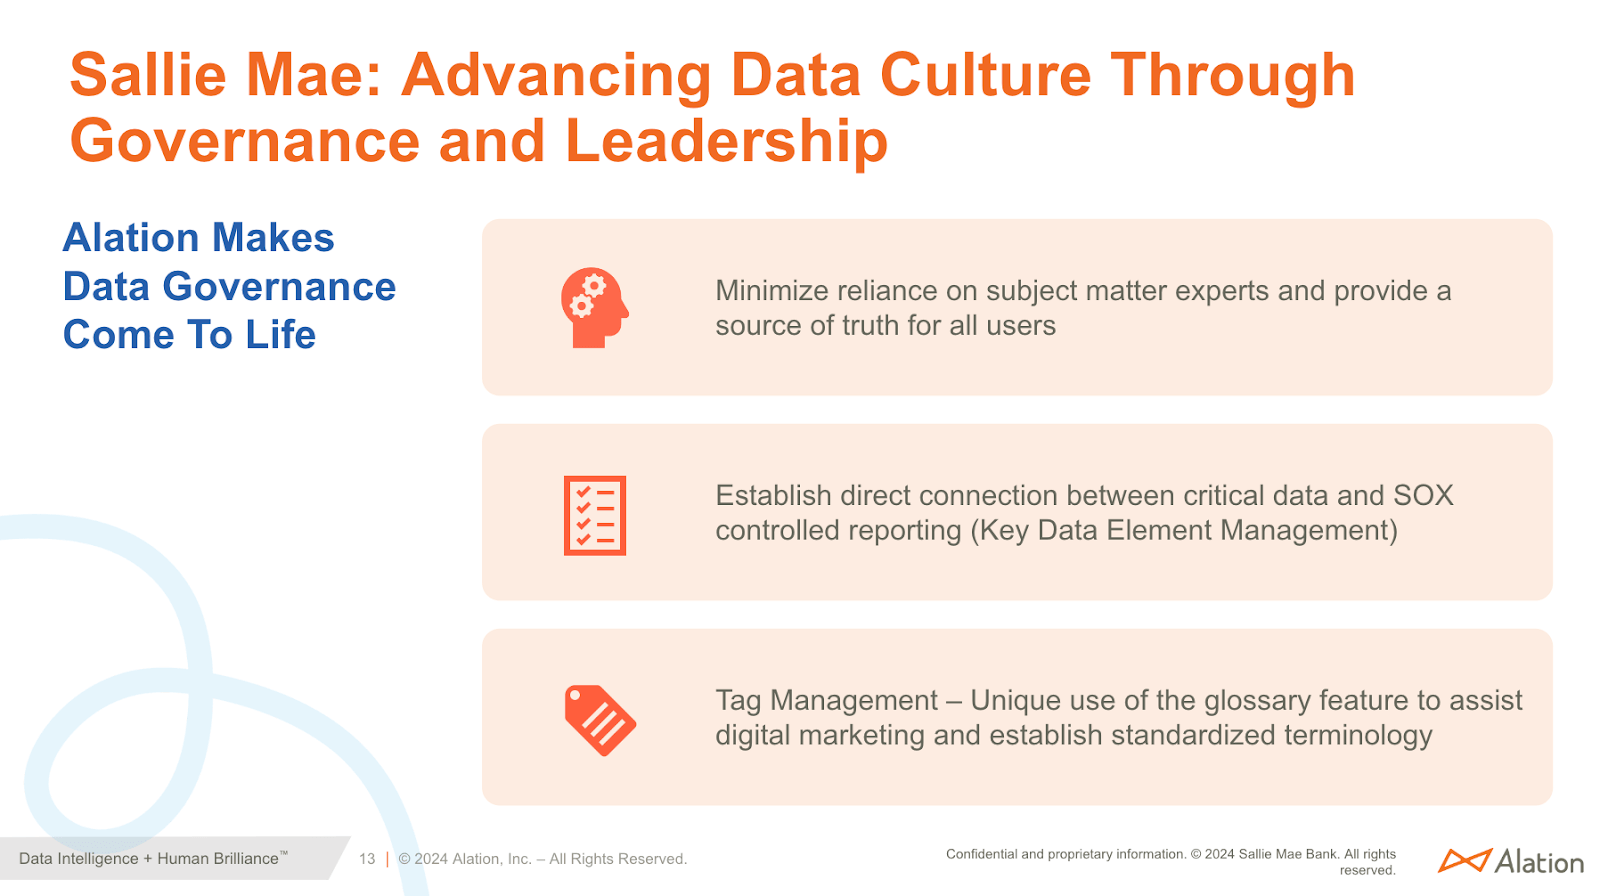 Sallie Mae Advancing Data Culture Through Governance and Leadership